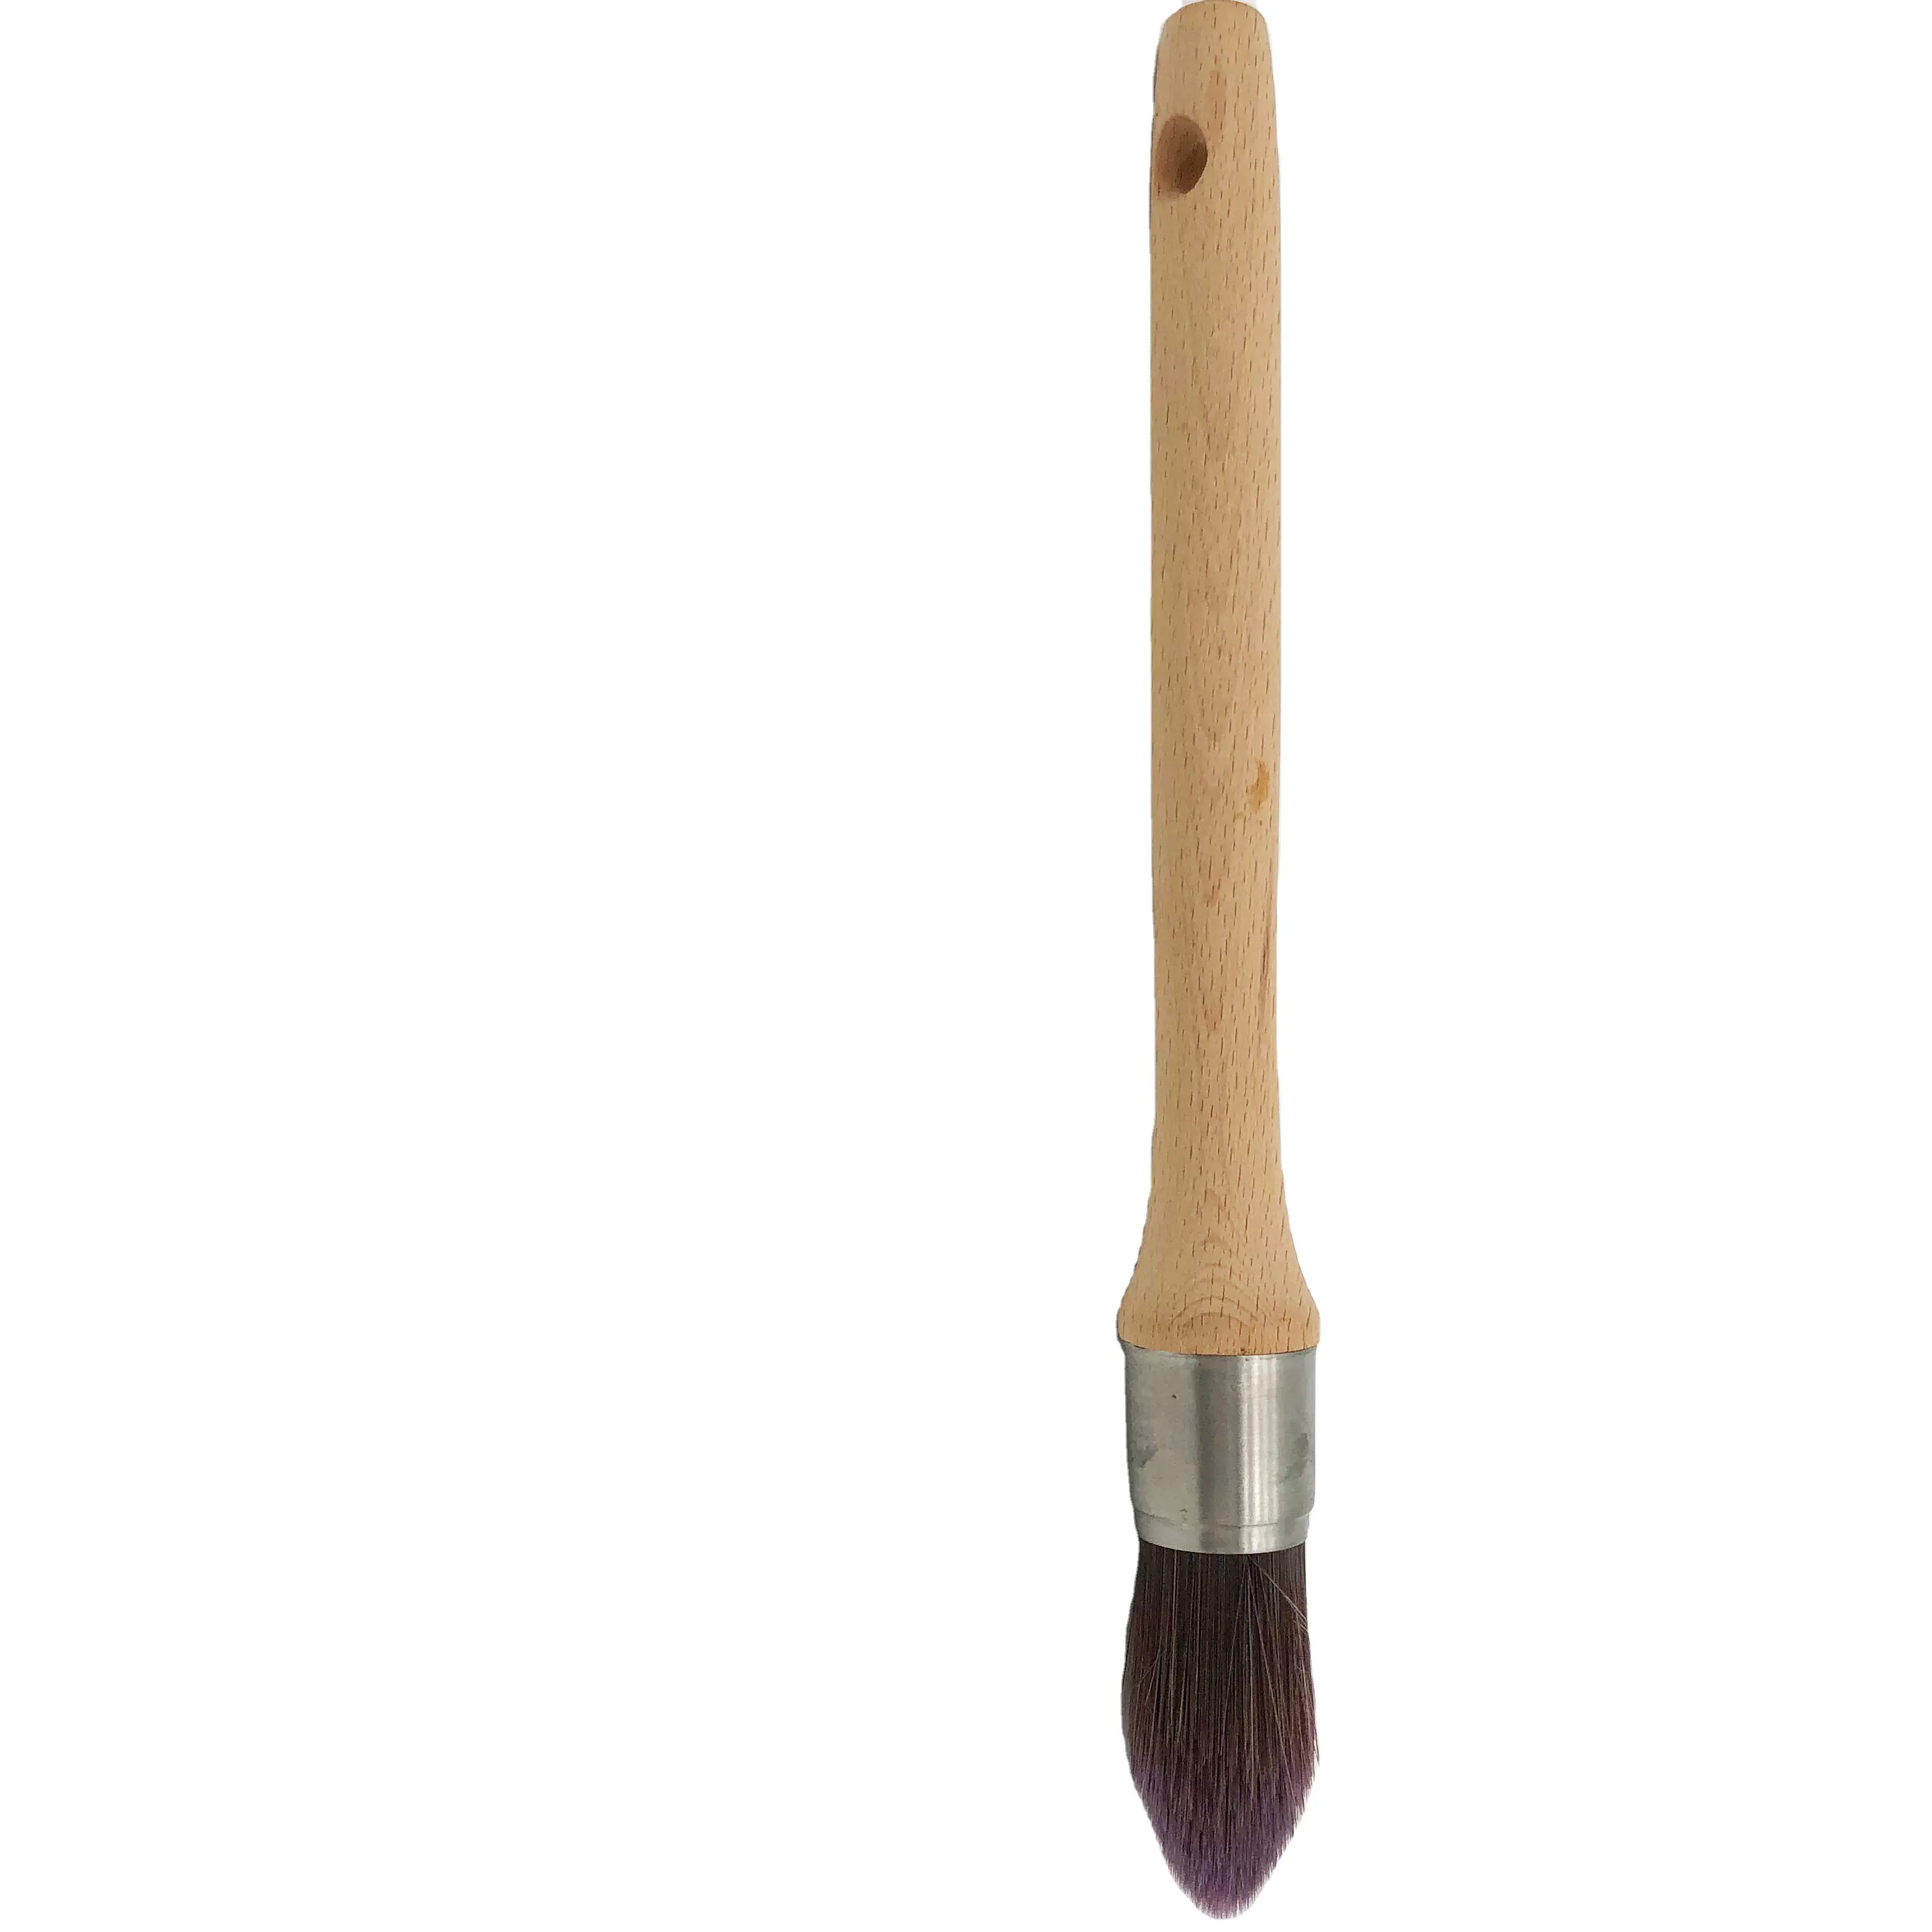 Cheap Customizable 1 inch 2inch 3inch Round Head Wood Handle Paint Brush for Furniture Wall Painting